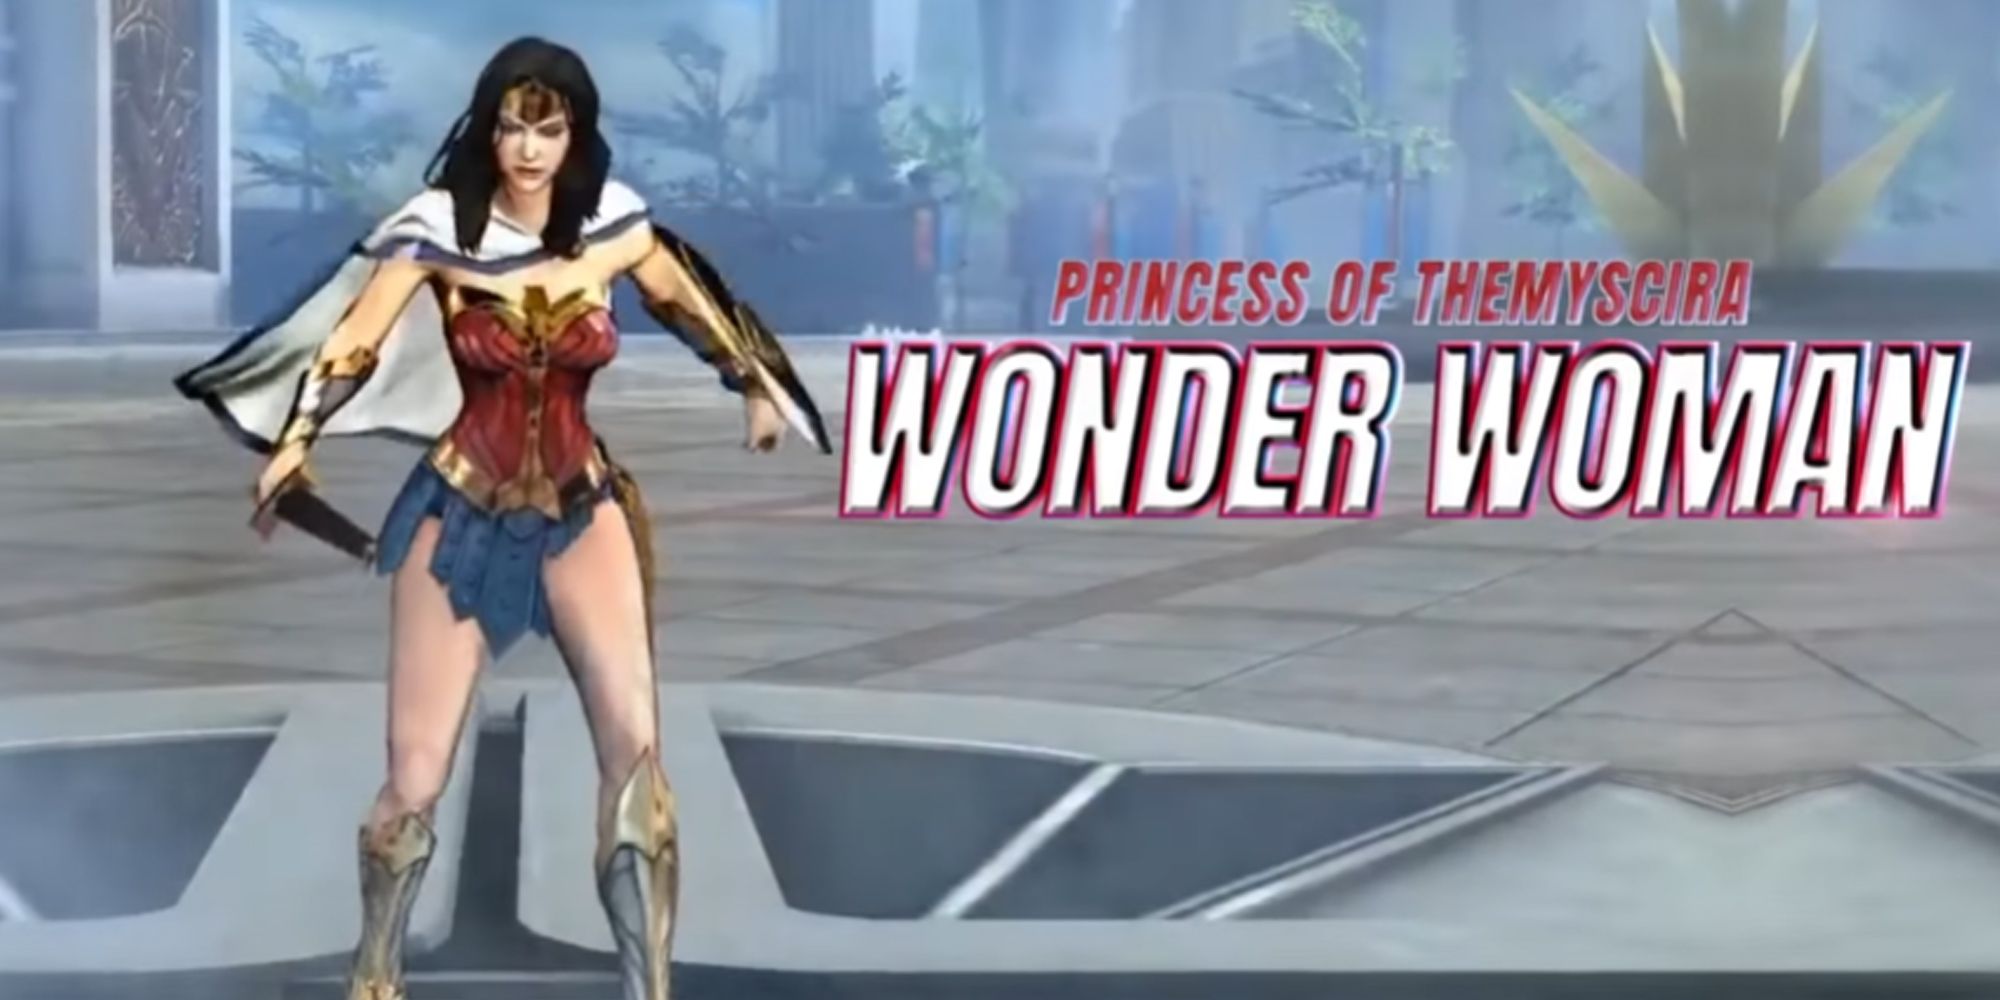 Wonder Woman as a playable character in DC Unchained.